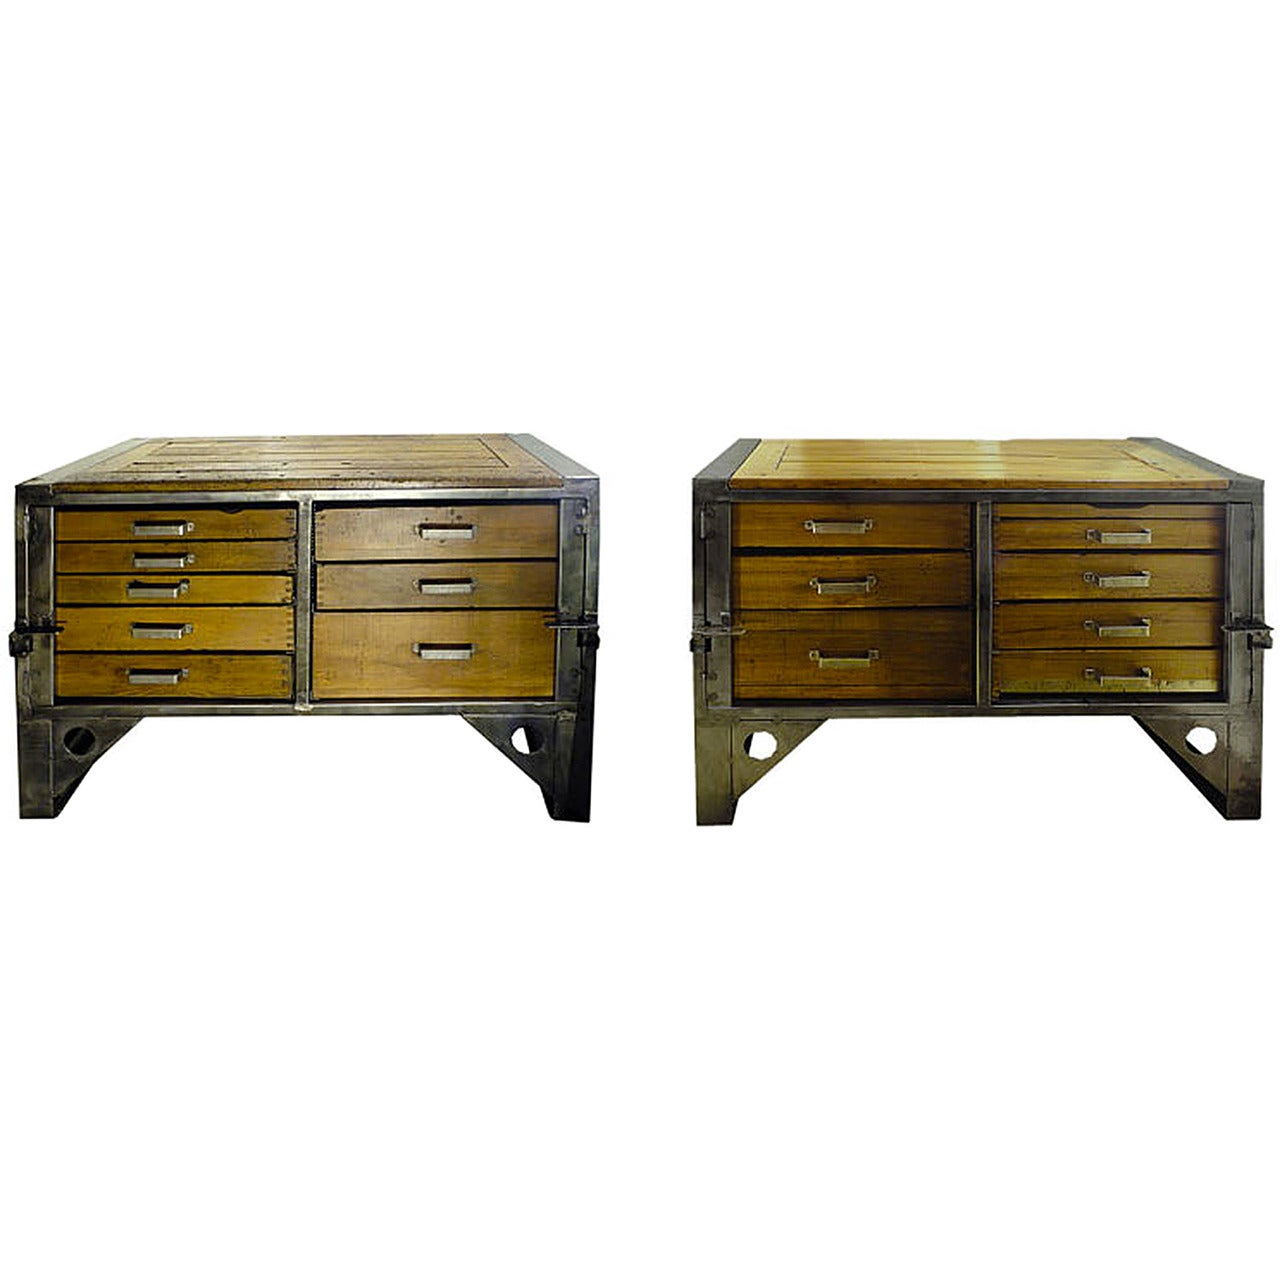 Two Industrial Chests of Drawers